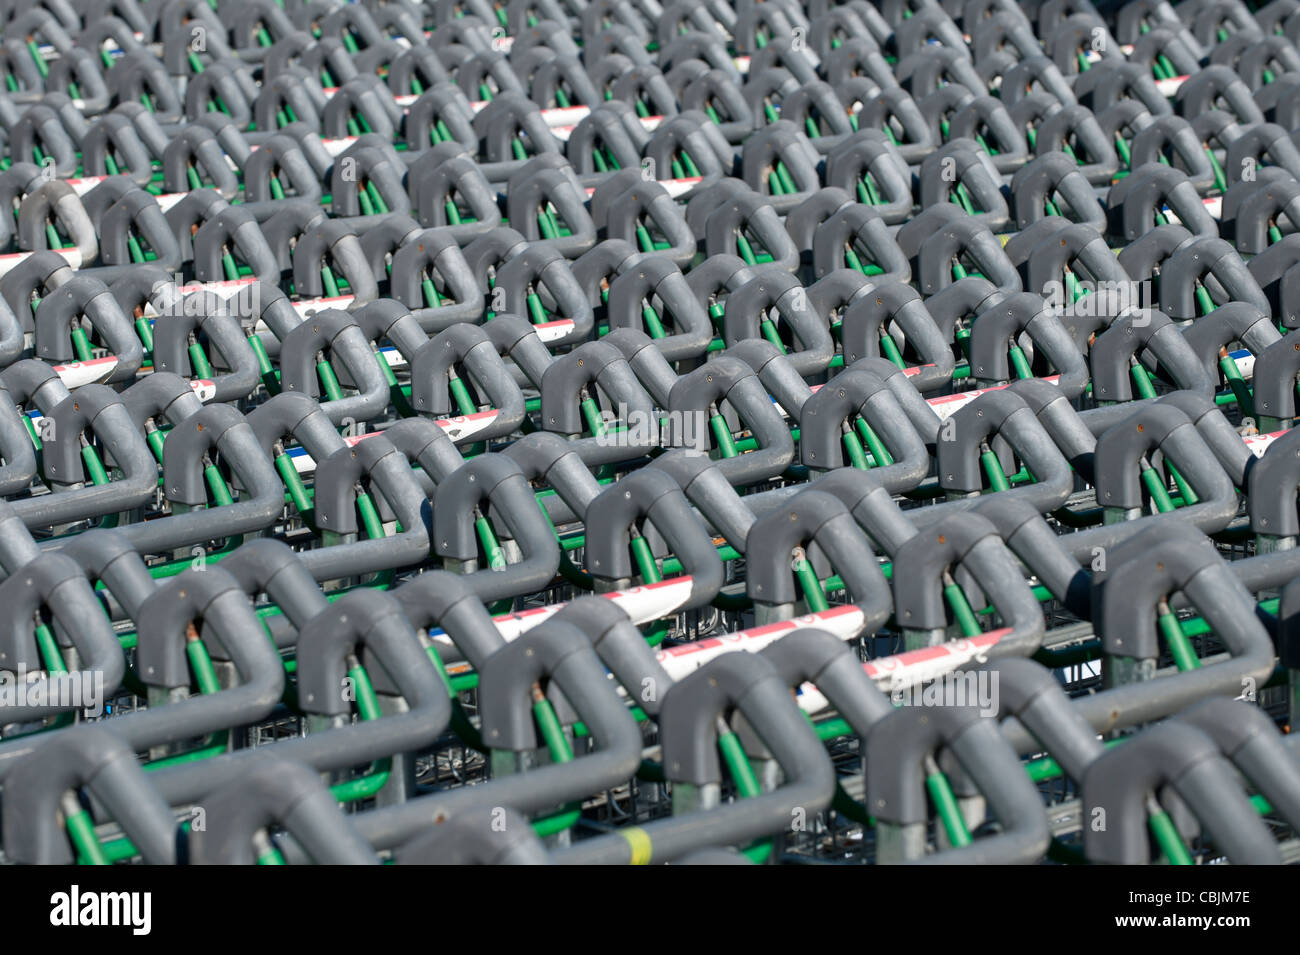 Rows of passenger trolleys or carts stand unused at Manchester Airport, UK. Stock Photo